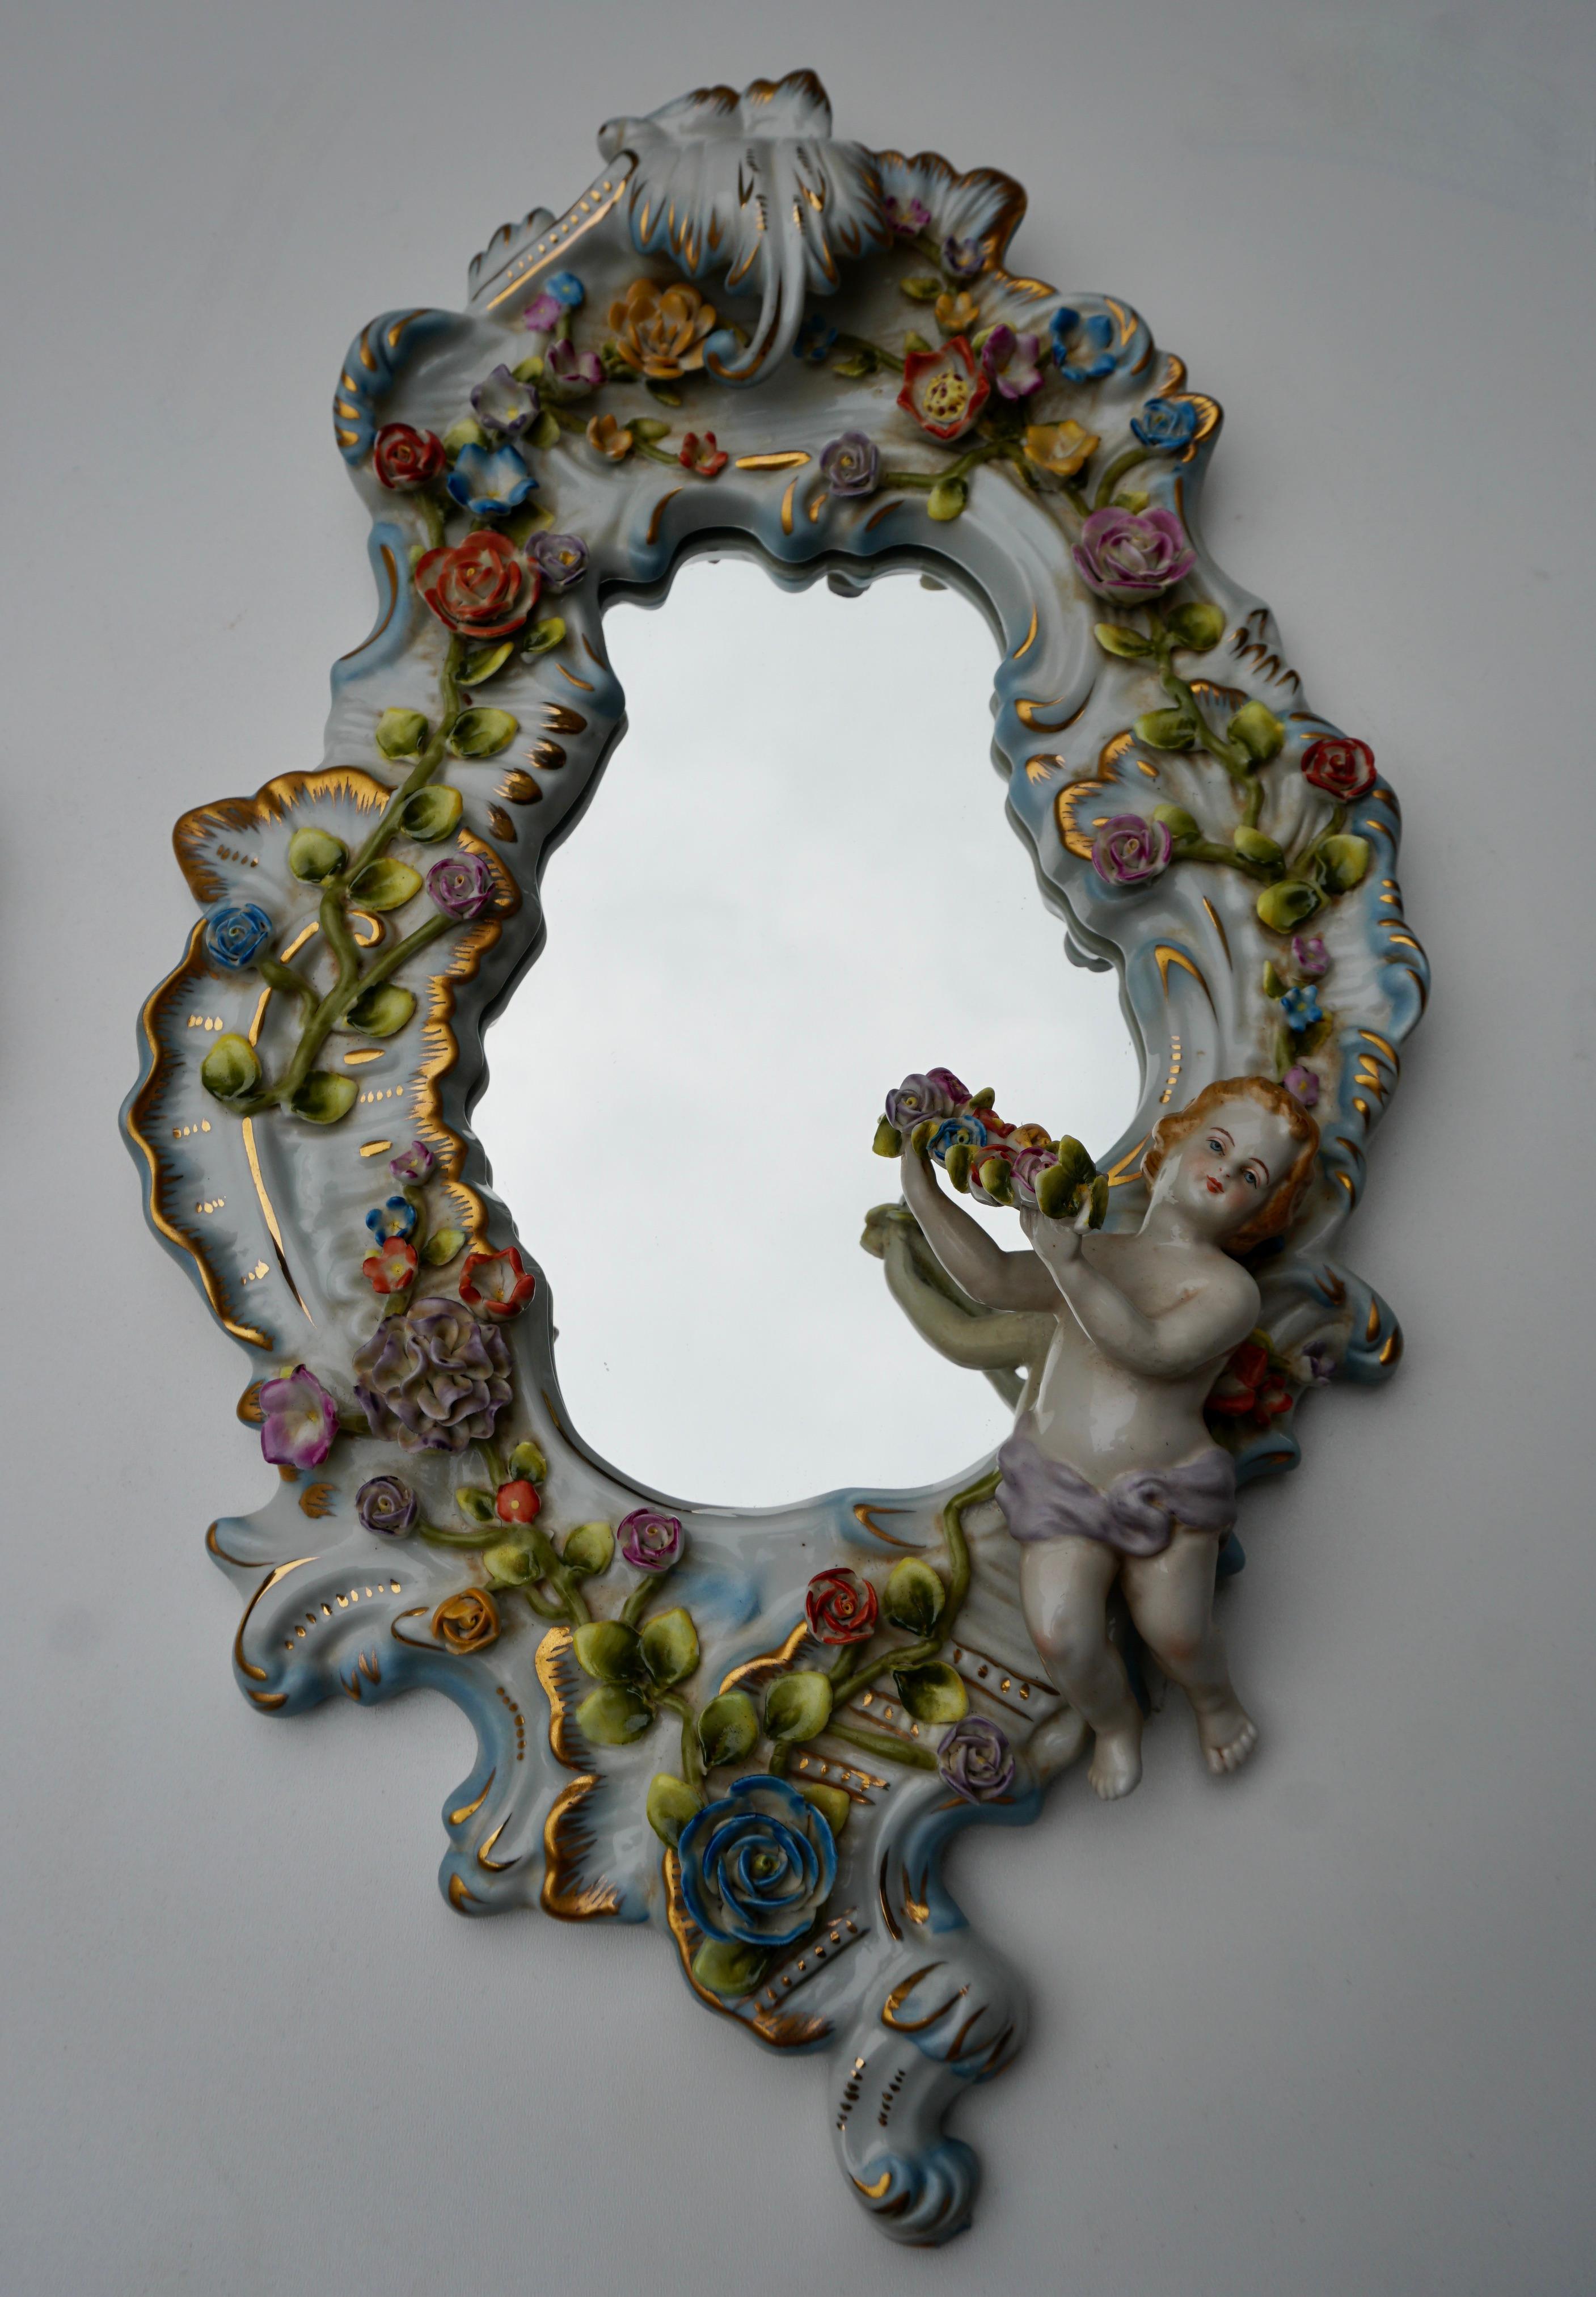 Two Vintage Capodimonte Porcelain Floral Cherub Wall Mirror Dresden In Good Condition For Sale In Antwerp, BE